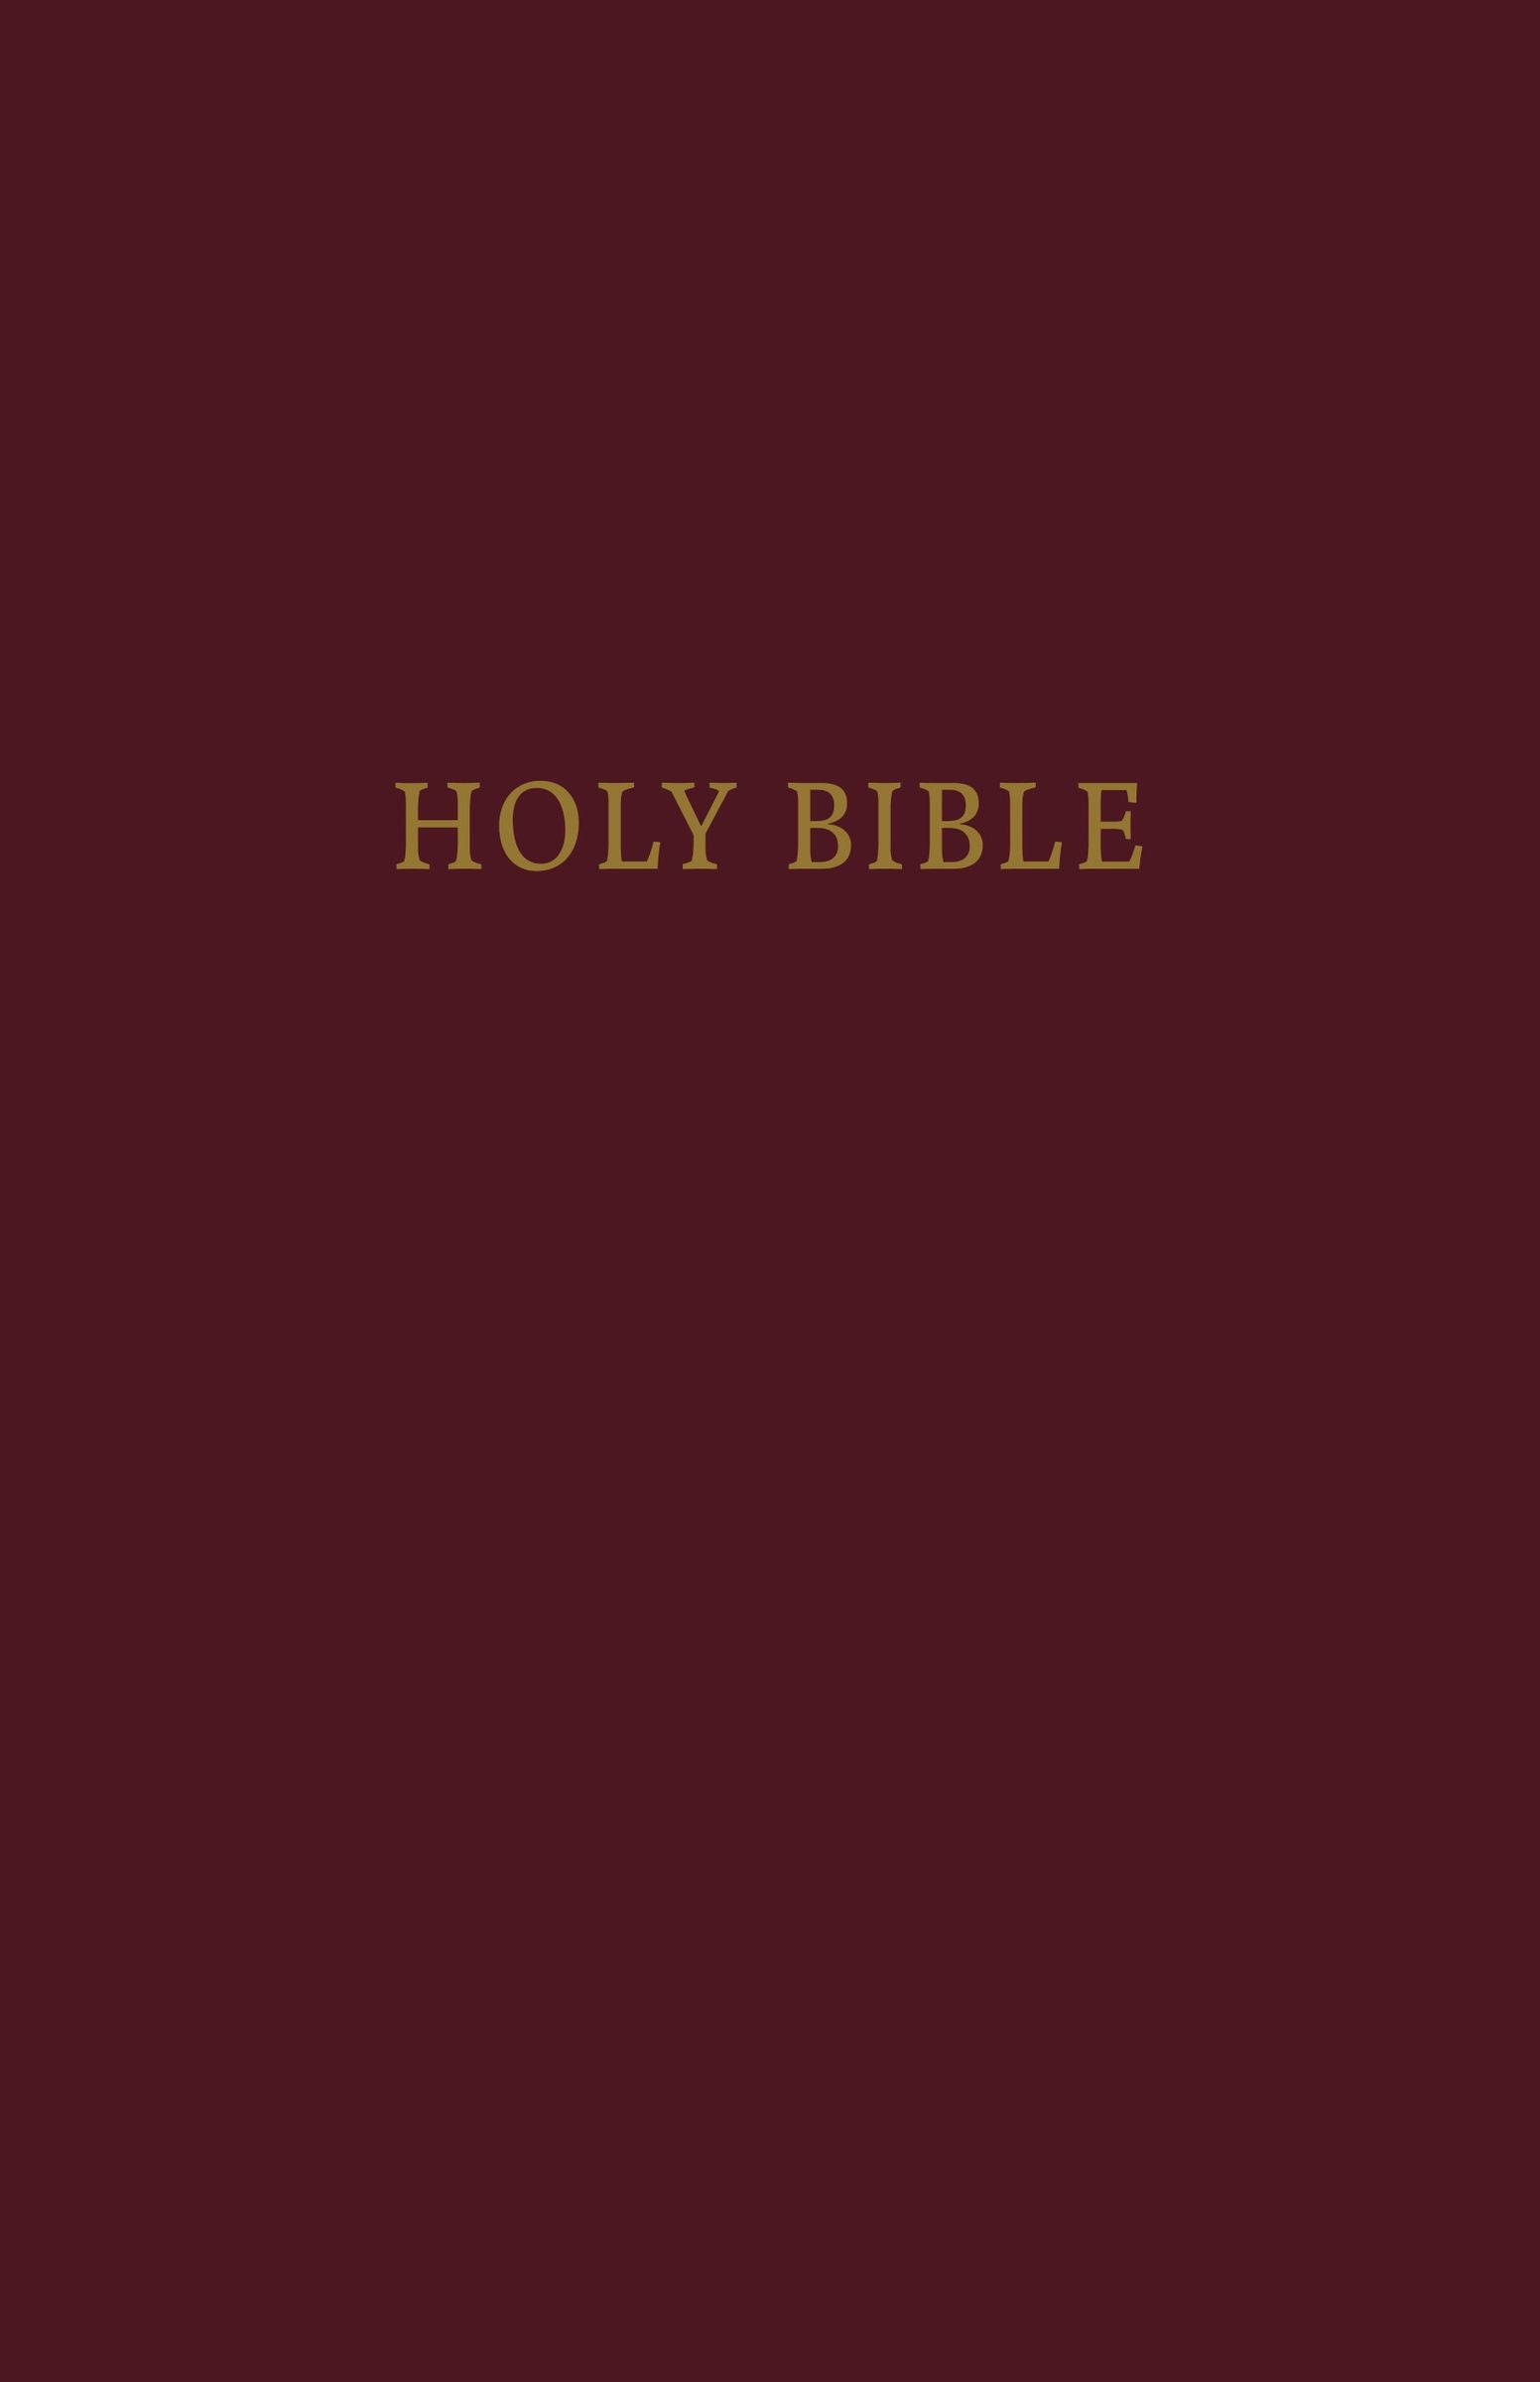 Image of KJV Large Print Pew Bible, Burgundy, Hardback, Red Letter, Tables of Weights and Measures, Useful Charts other